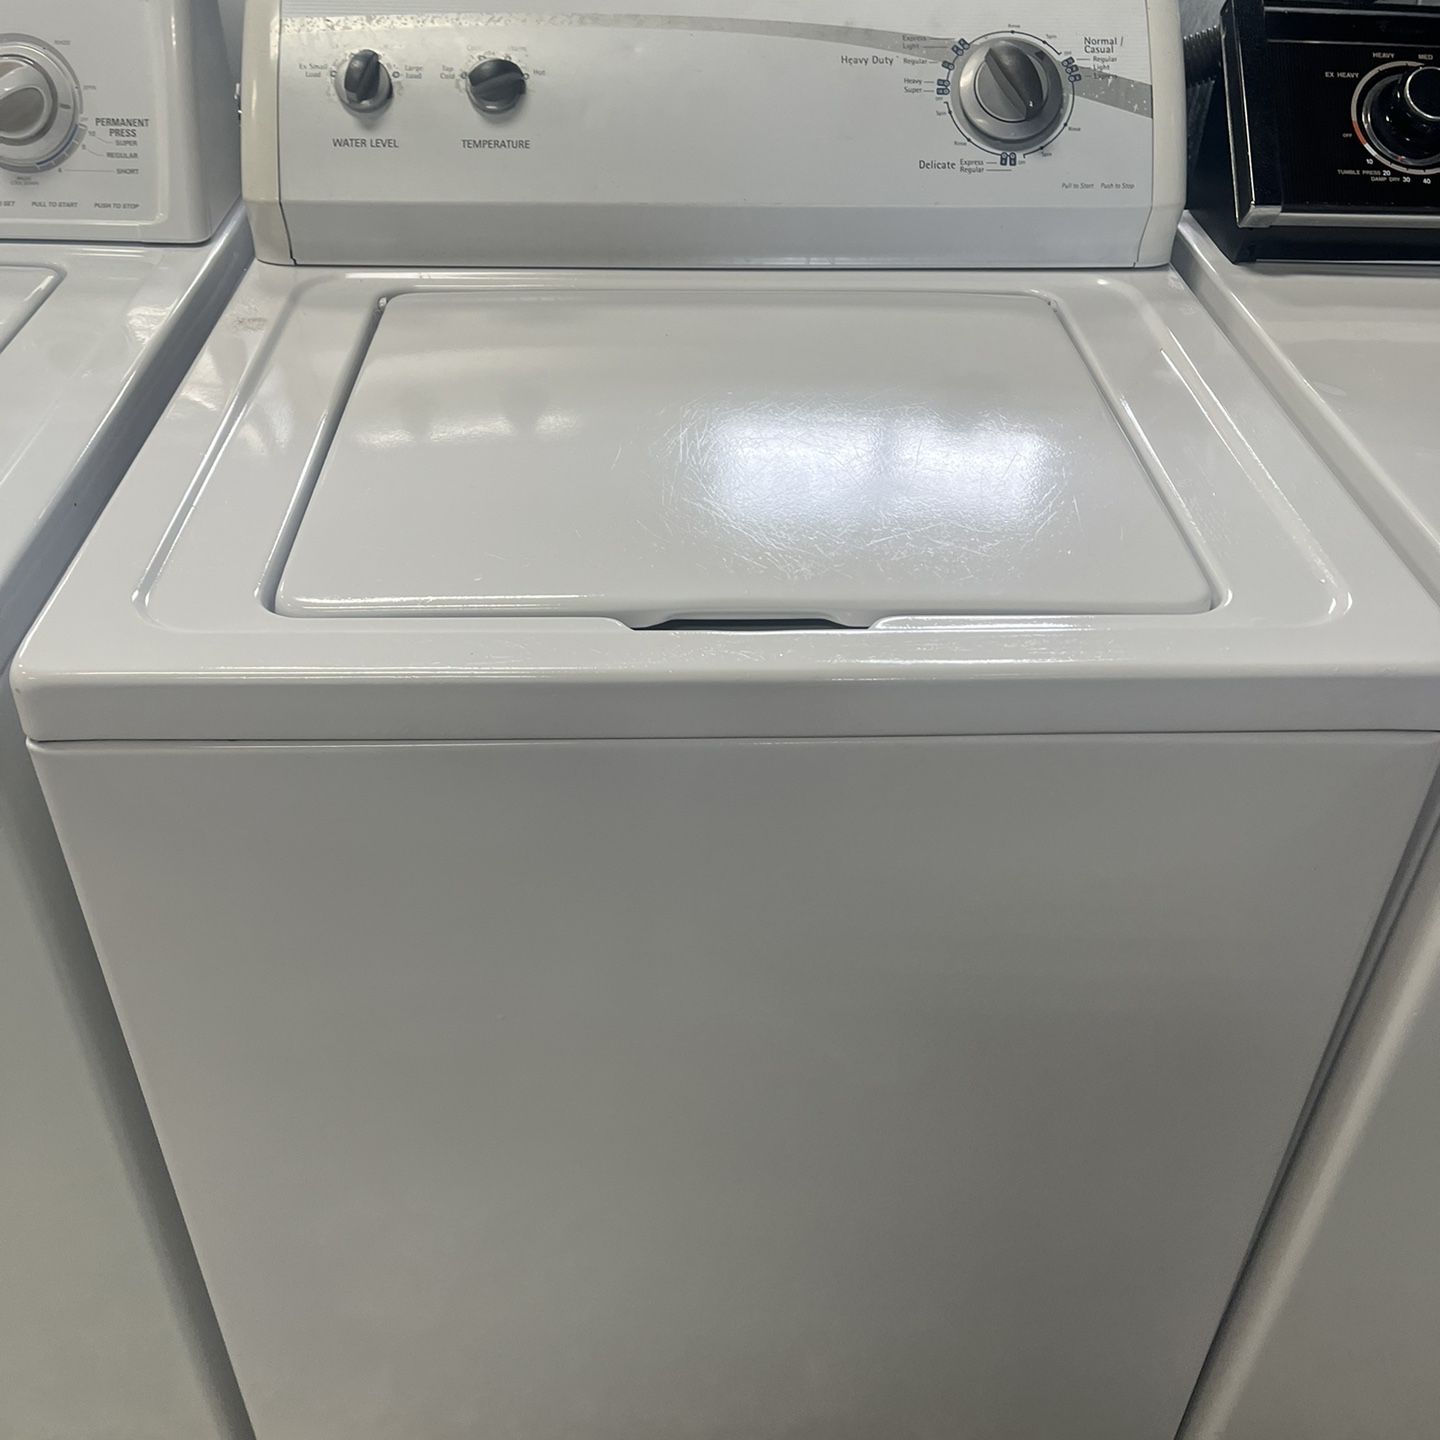 Washer Kenmore Great Condition 